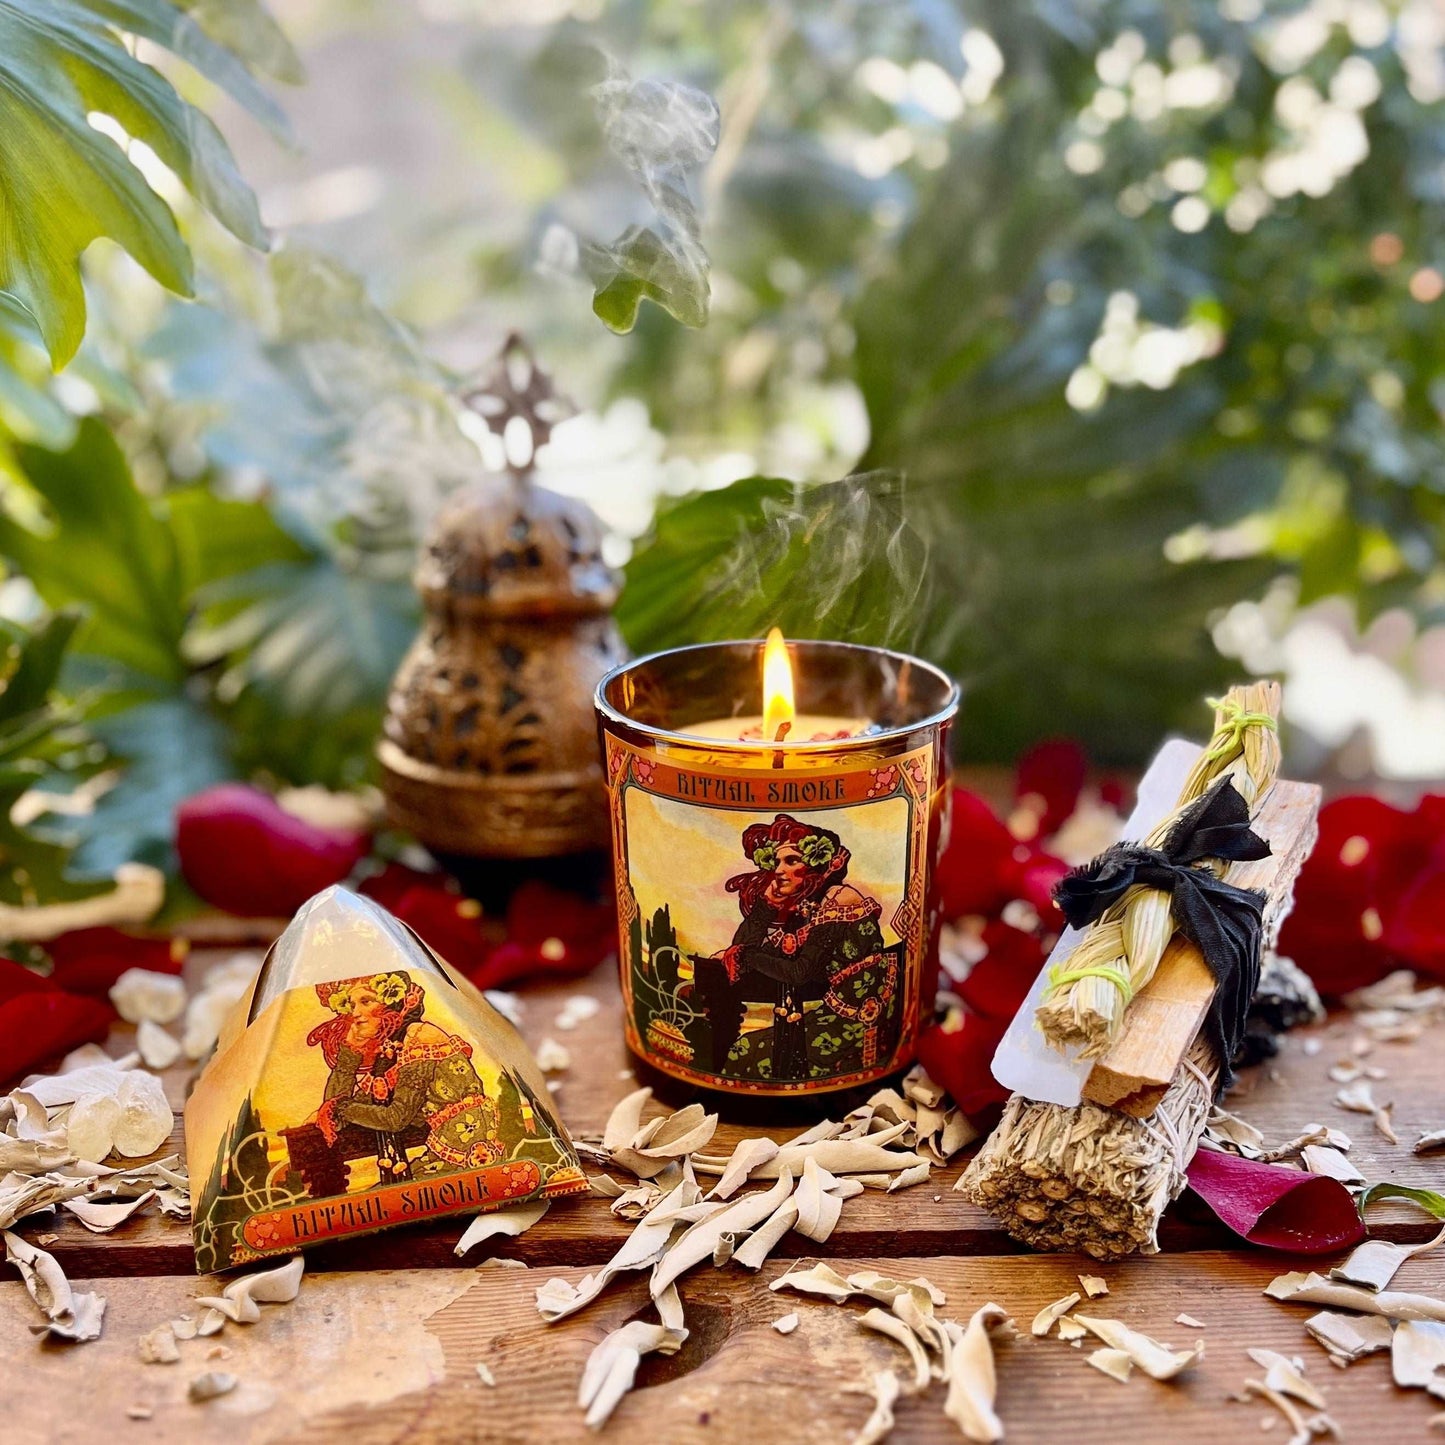 Immerse yourself in the enchanting aura of our Ritual Smoke Bath Bomb, blending Orange, Fir, Cedar, and Firewood essential oils. Embrace the ritualistic experience and let the captivating fragrance elevate your spirits. Perfect companions for your bathing ritual are our Ritual Smoke Candle and Ritual Smoke Bundle.